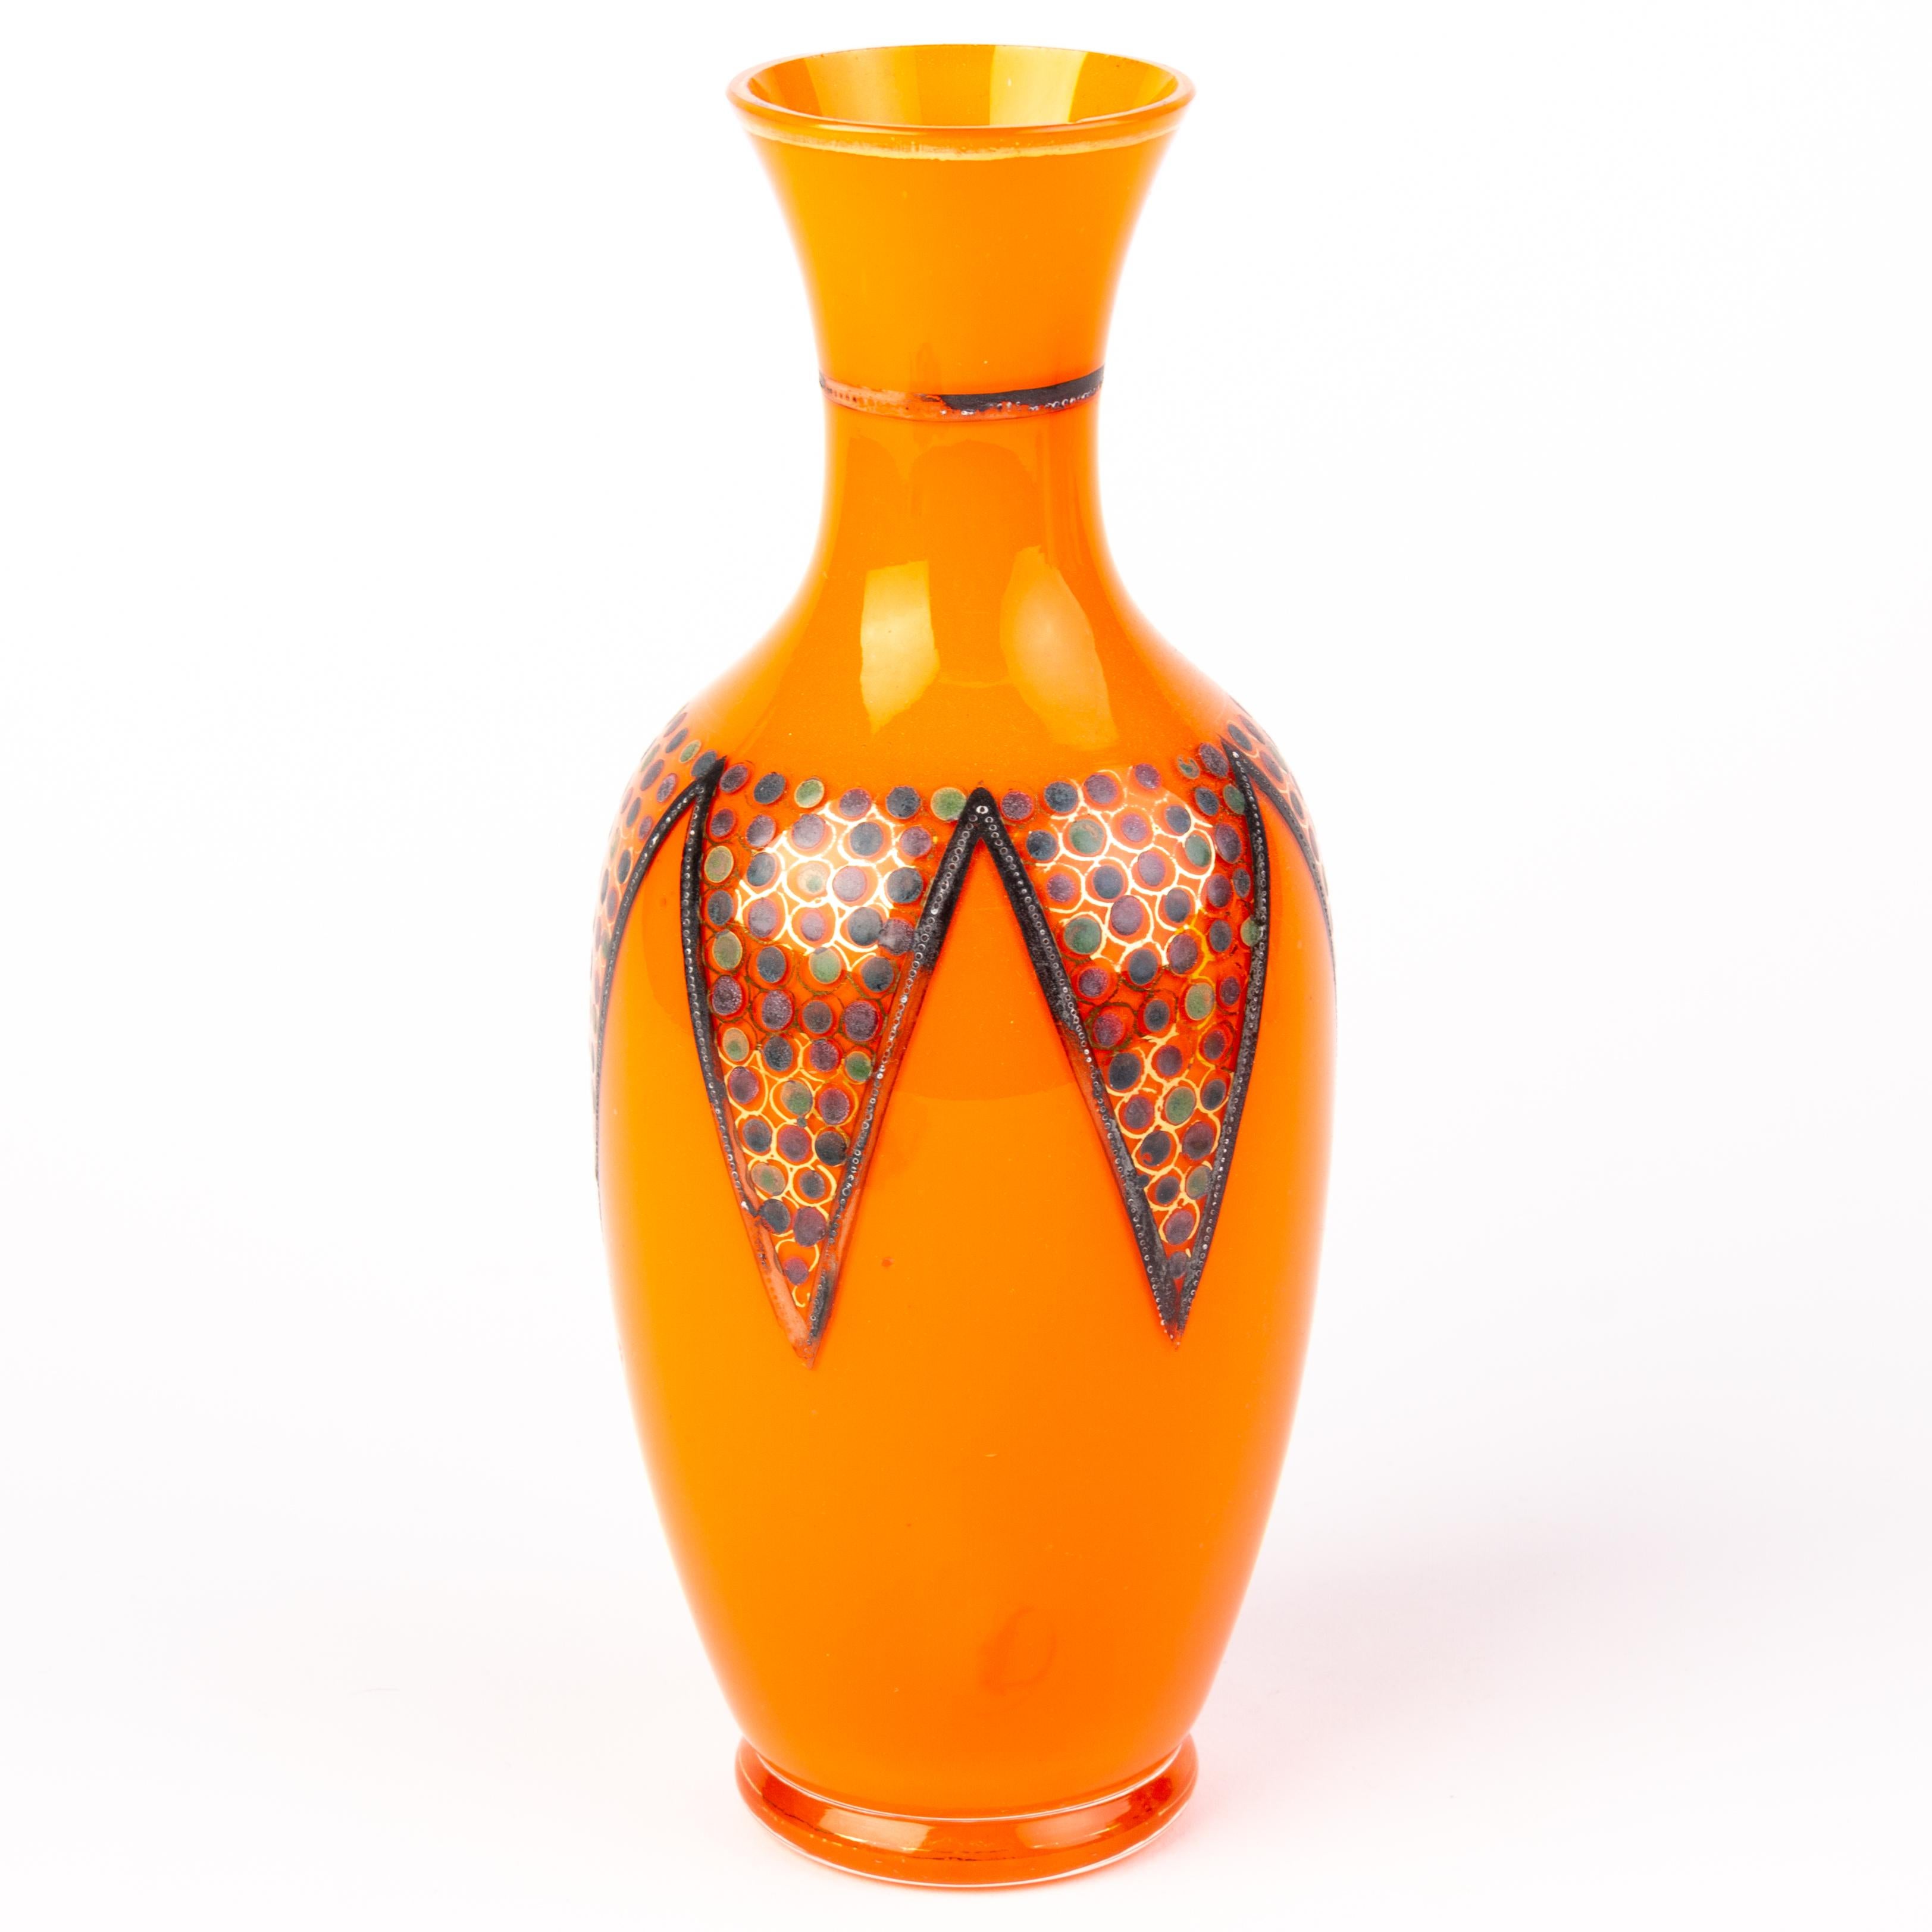 In good condition
From a private collection
Manner of Loetz Orange Tango Bohemian Glass Art Nouveau Vase
